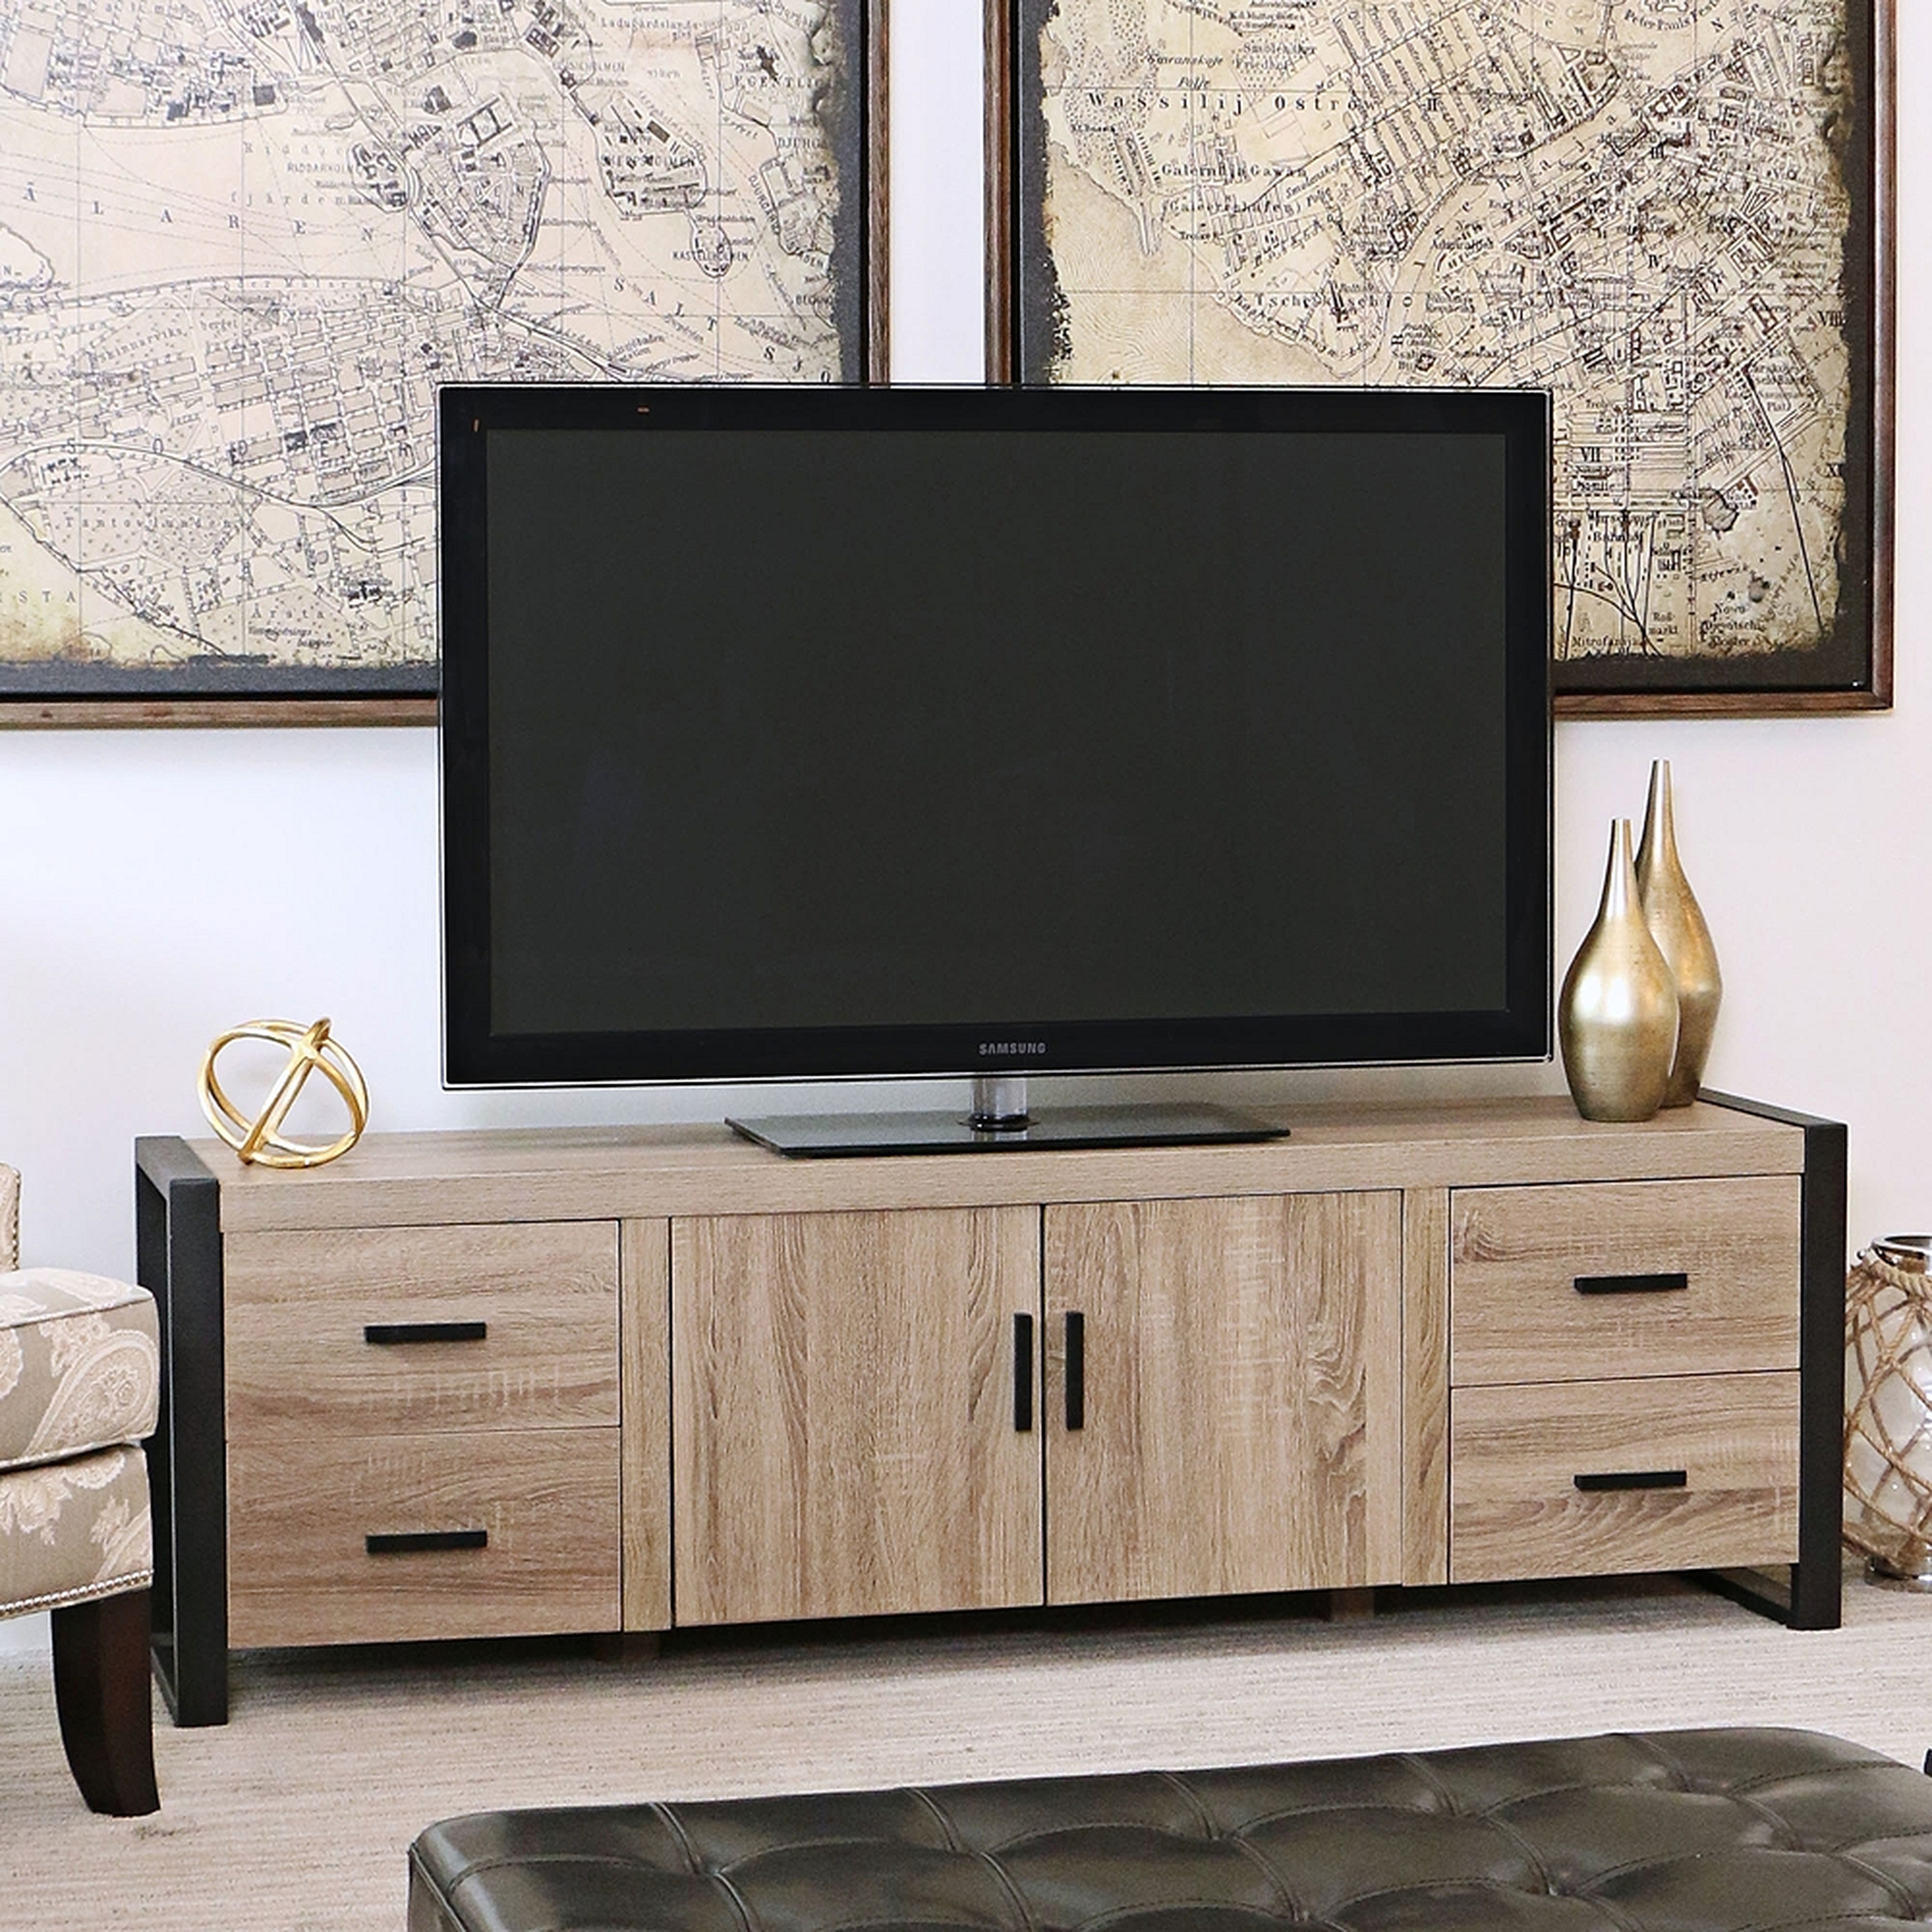 Urban Blend Driftwood 4-Drawer TV Stand Console - Style # 1W401 - Lamps Plus